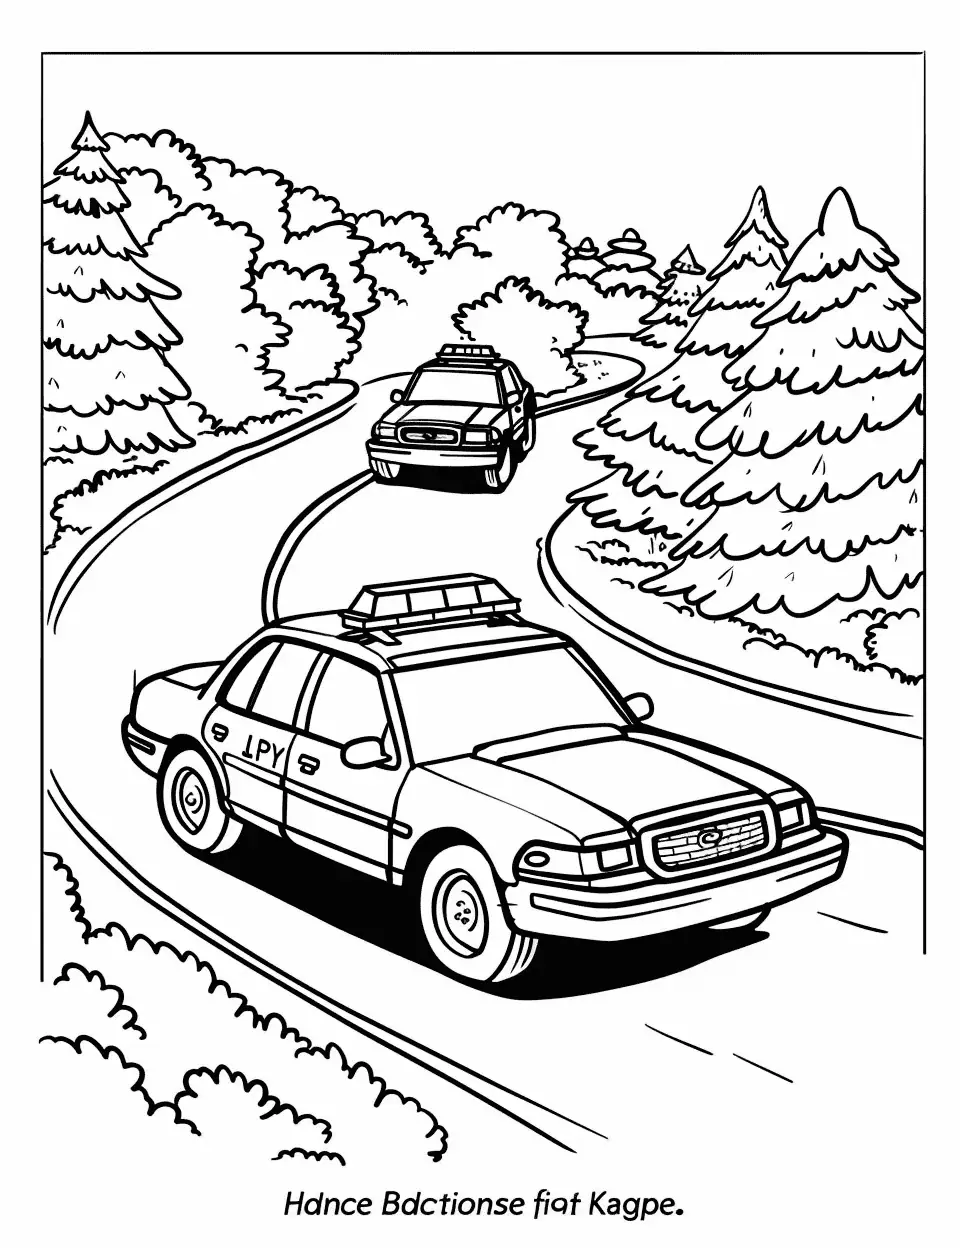 Race Car Chase Police Coloring Page - A dynamic scene with a police car chasing a stolen police car down a winding road.